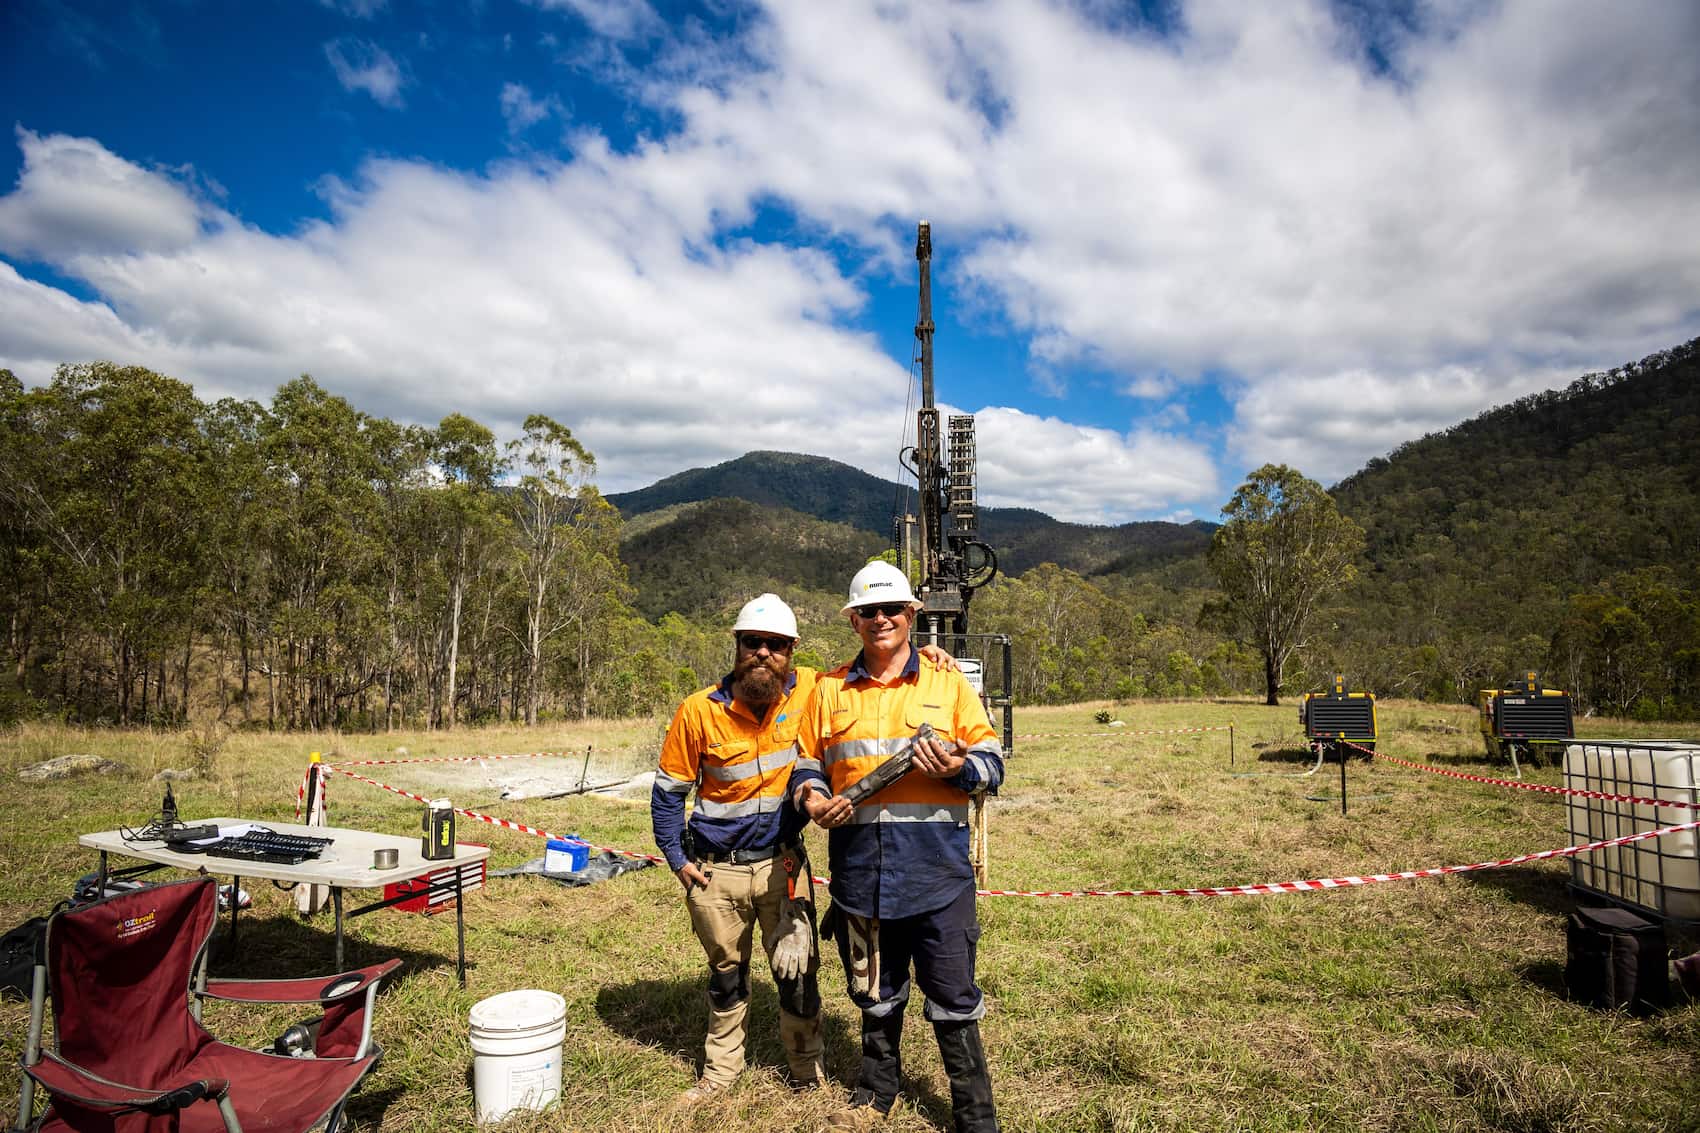 The geotechnical drilling team hard at work on site near the Oven Mountain lower reservoir